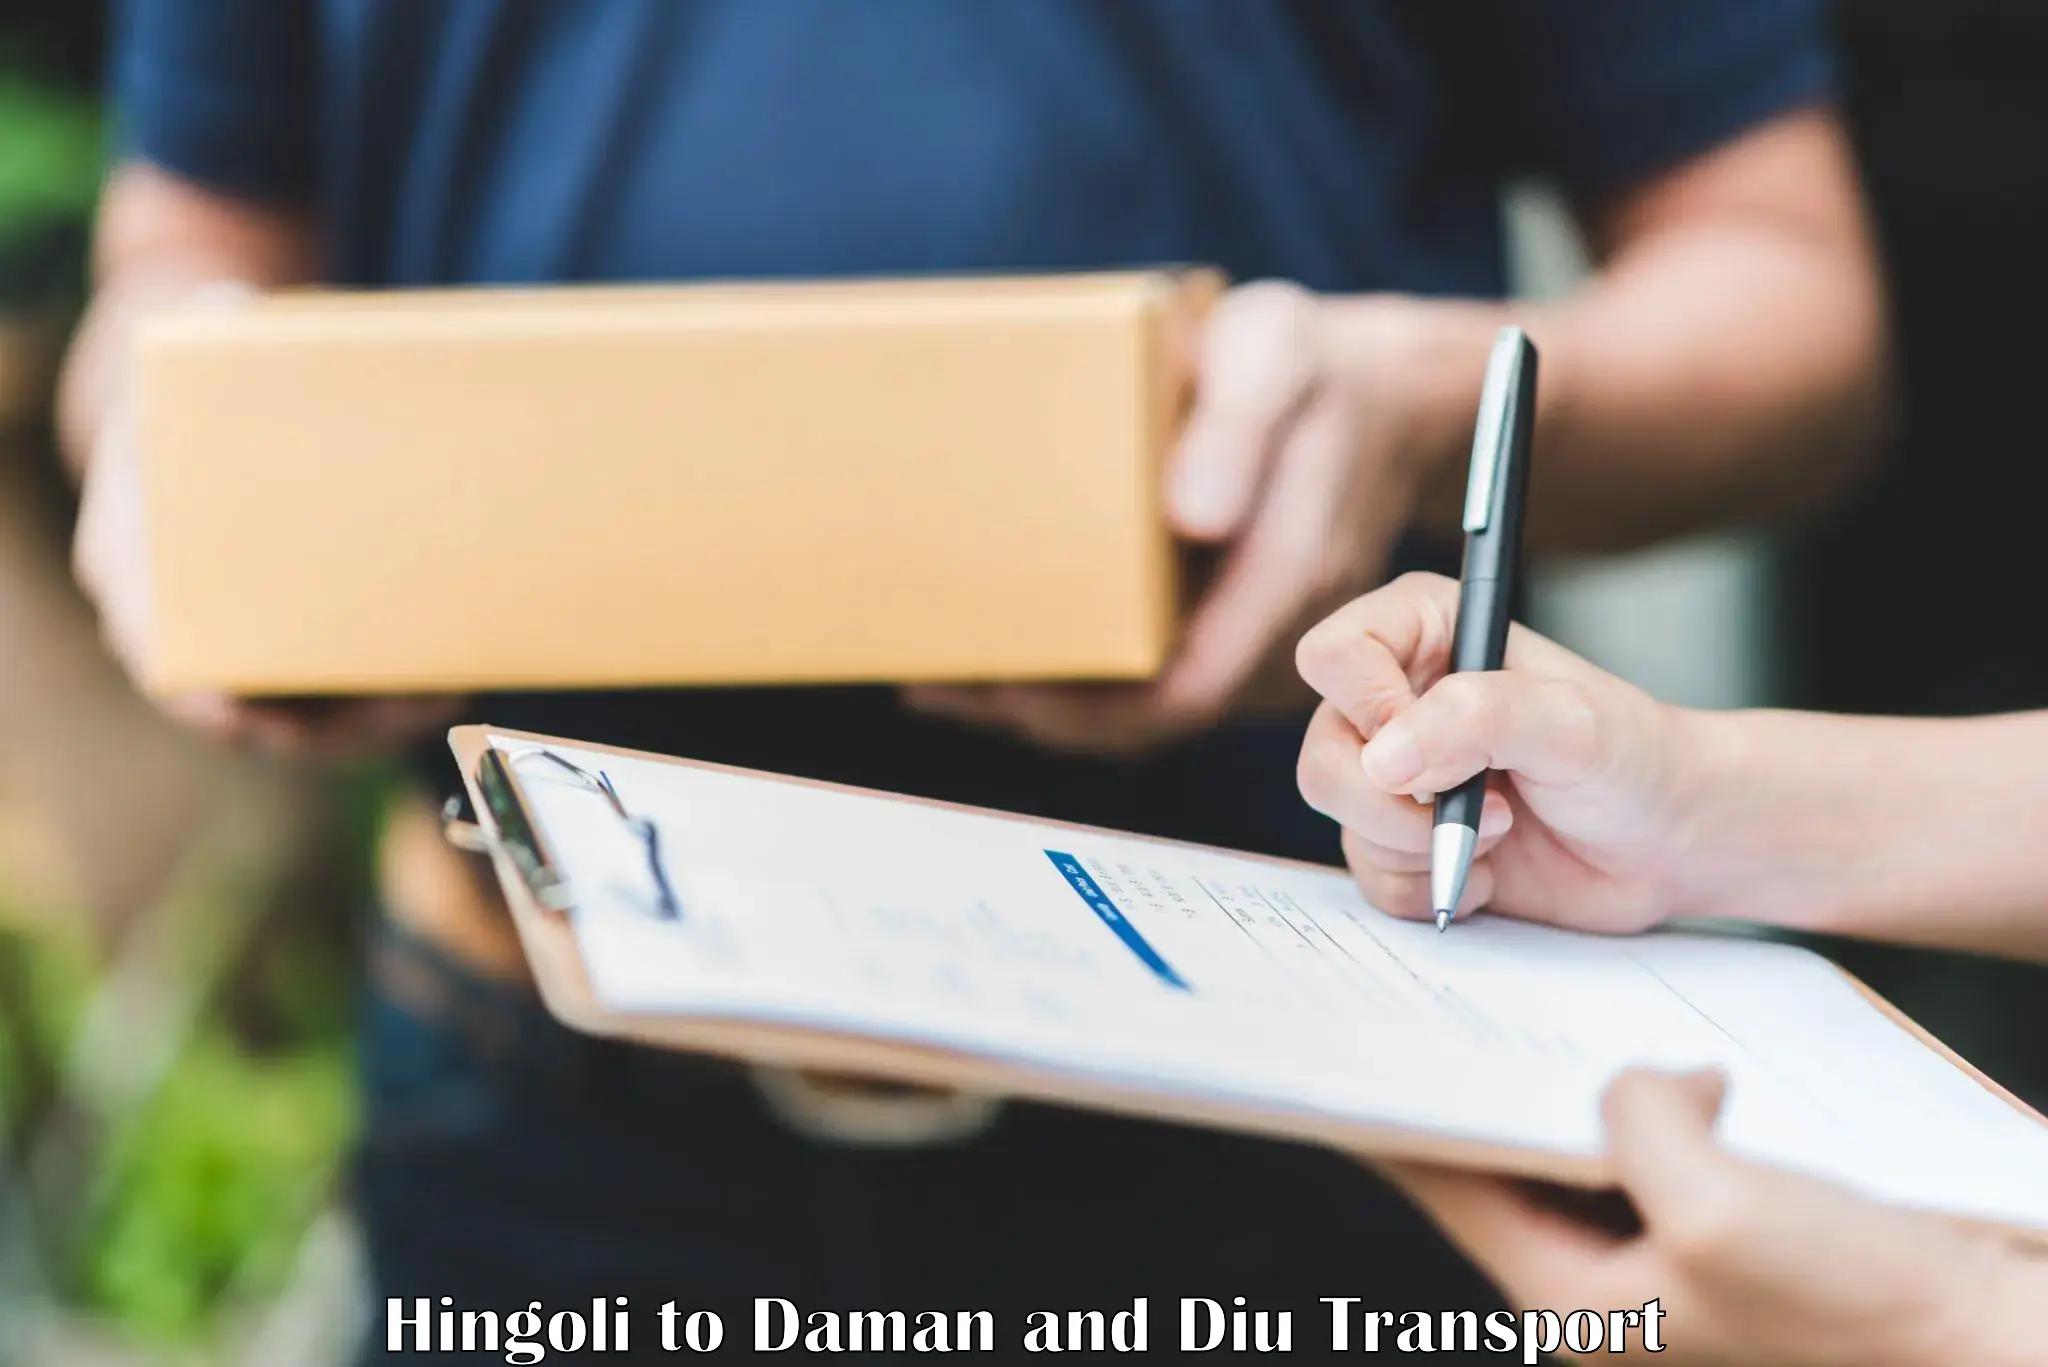 Container transport service Hingoli to Daman and Diu